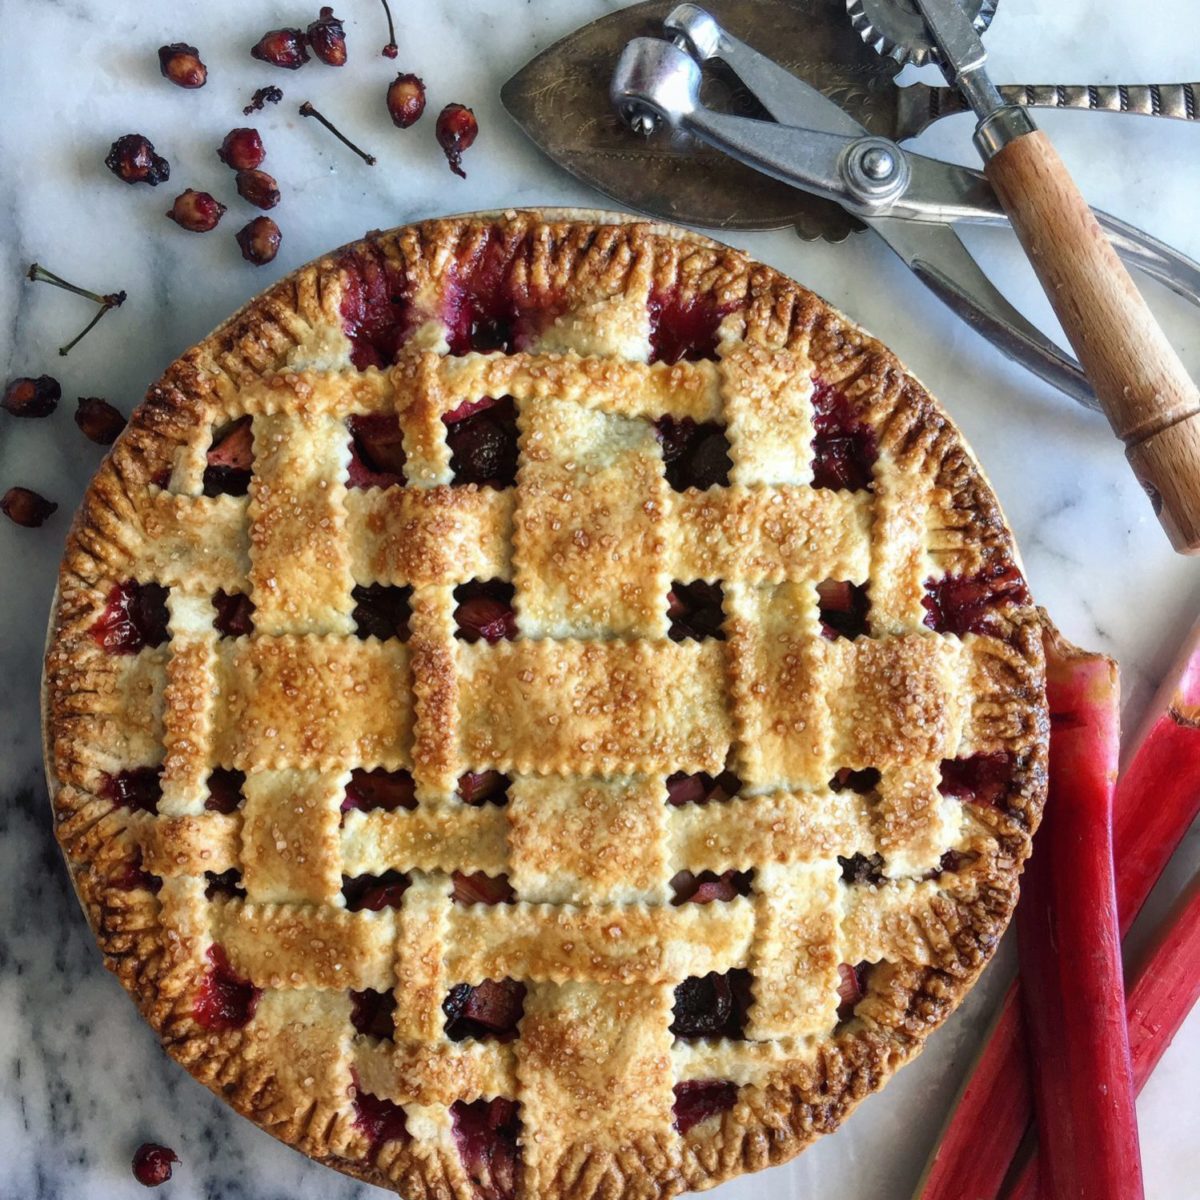 Cherry and Rhubarb Pie with Urfa Biber and Allspice